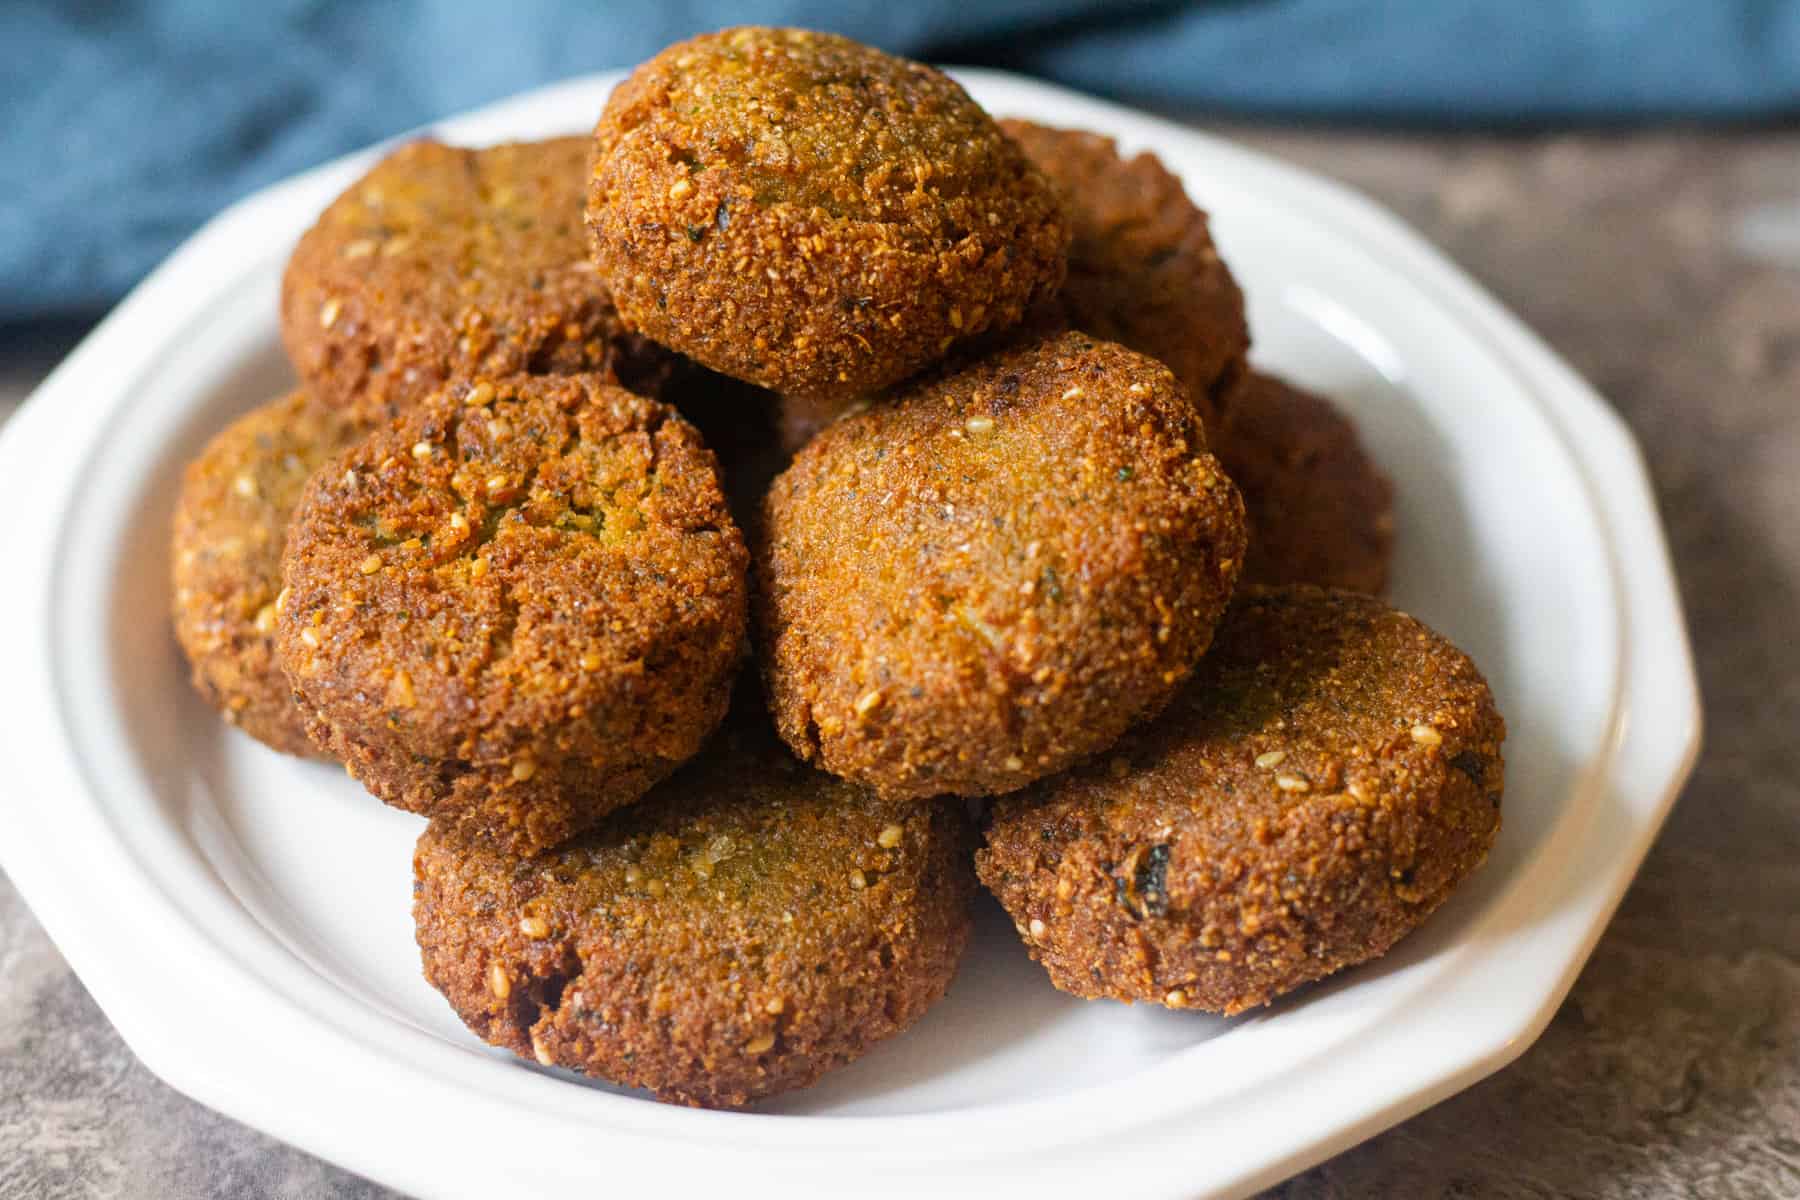 These vegan chickpea patties ate crispy on the outside and tender on the inside. 